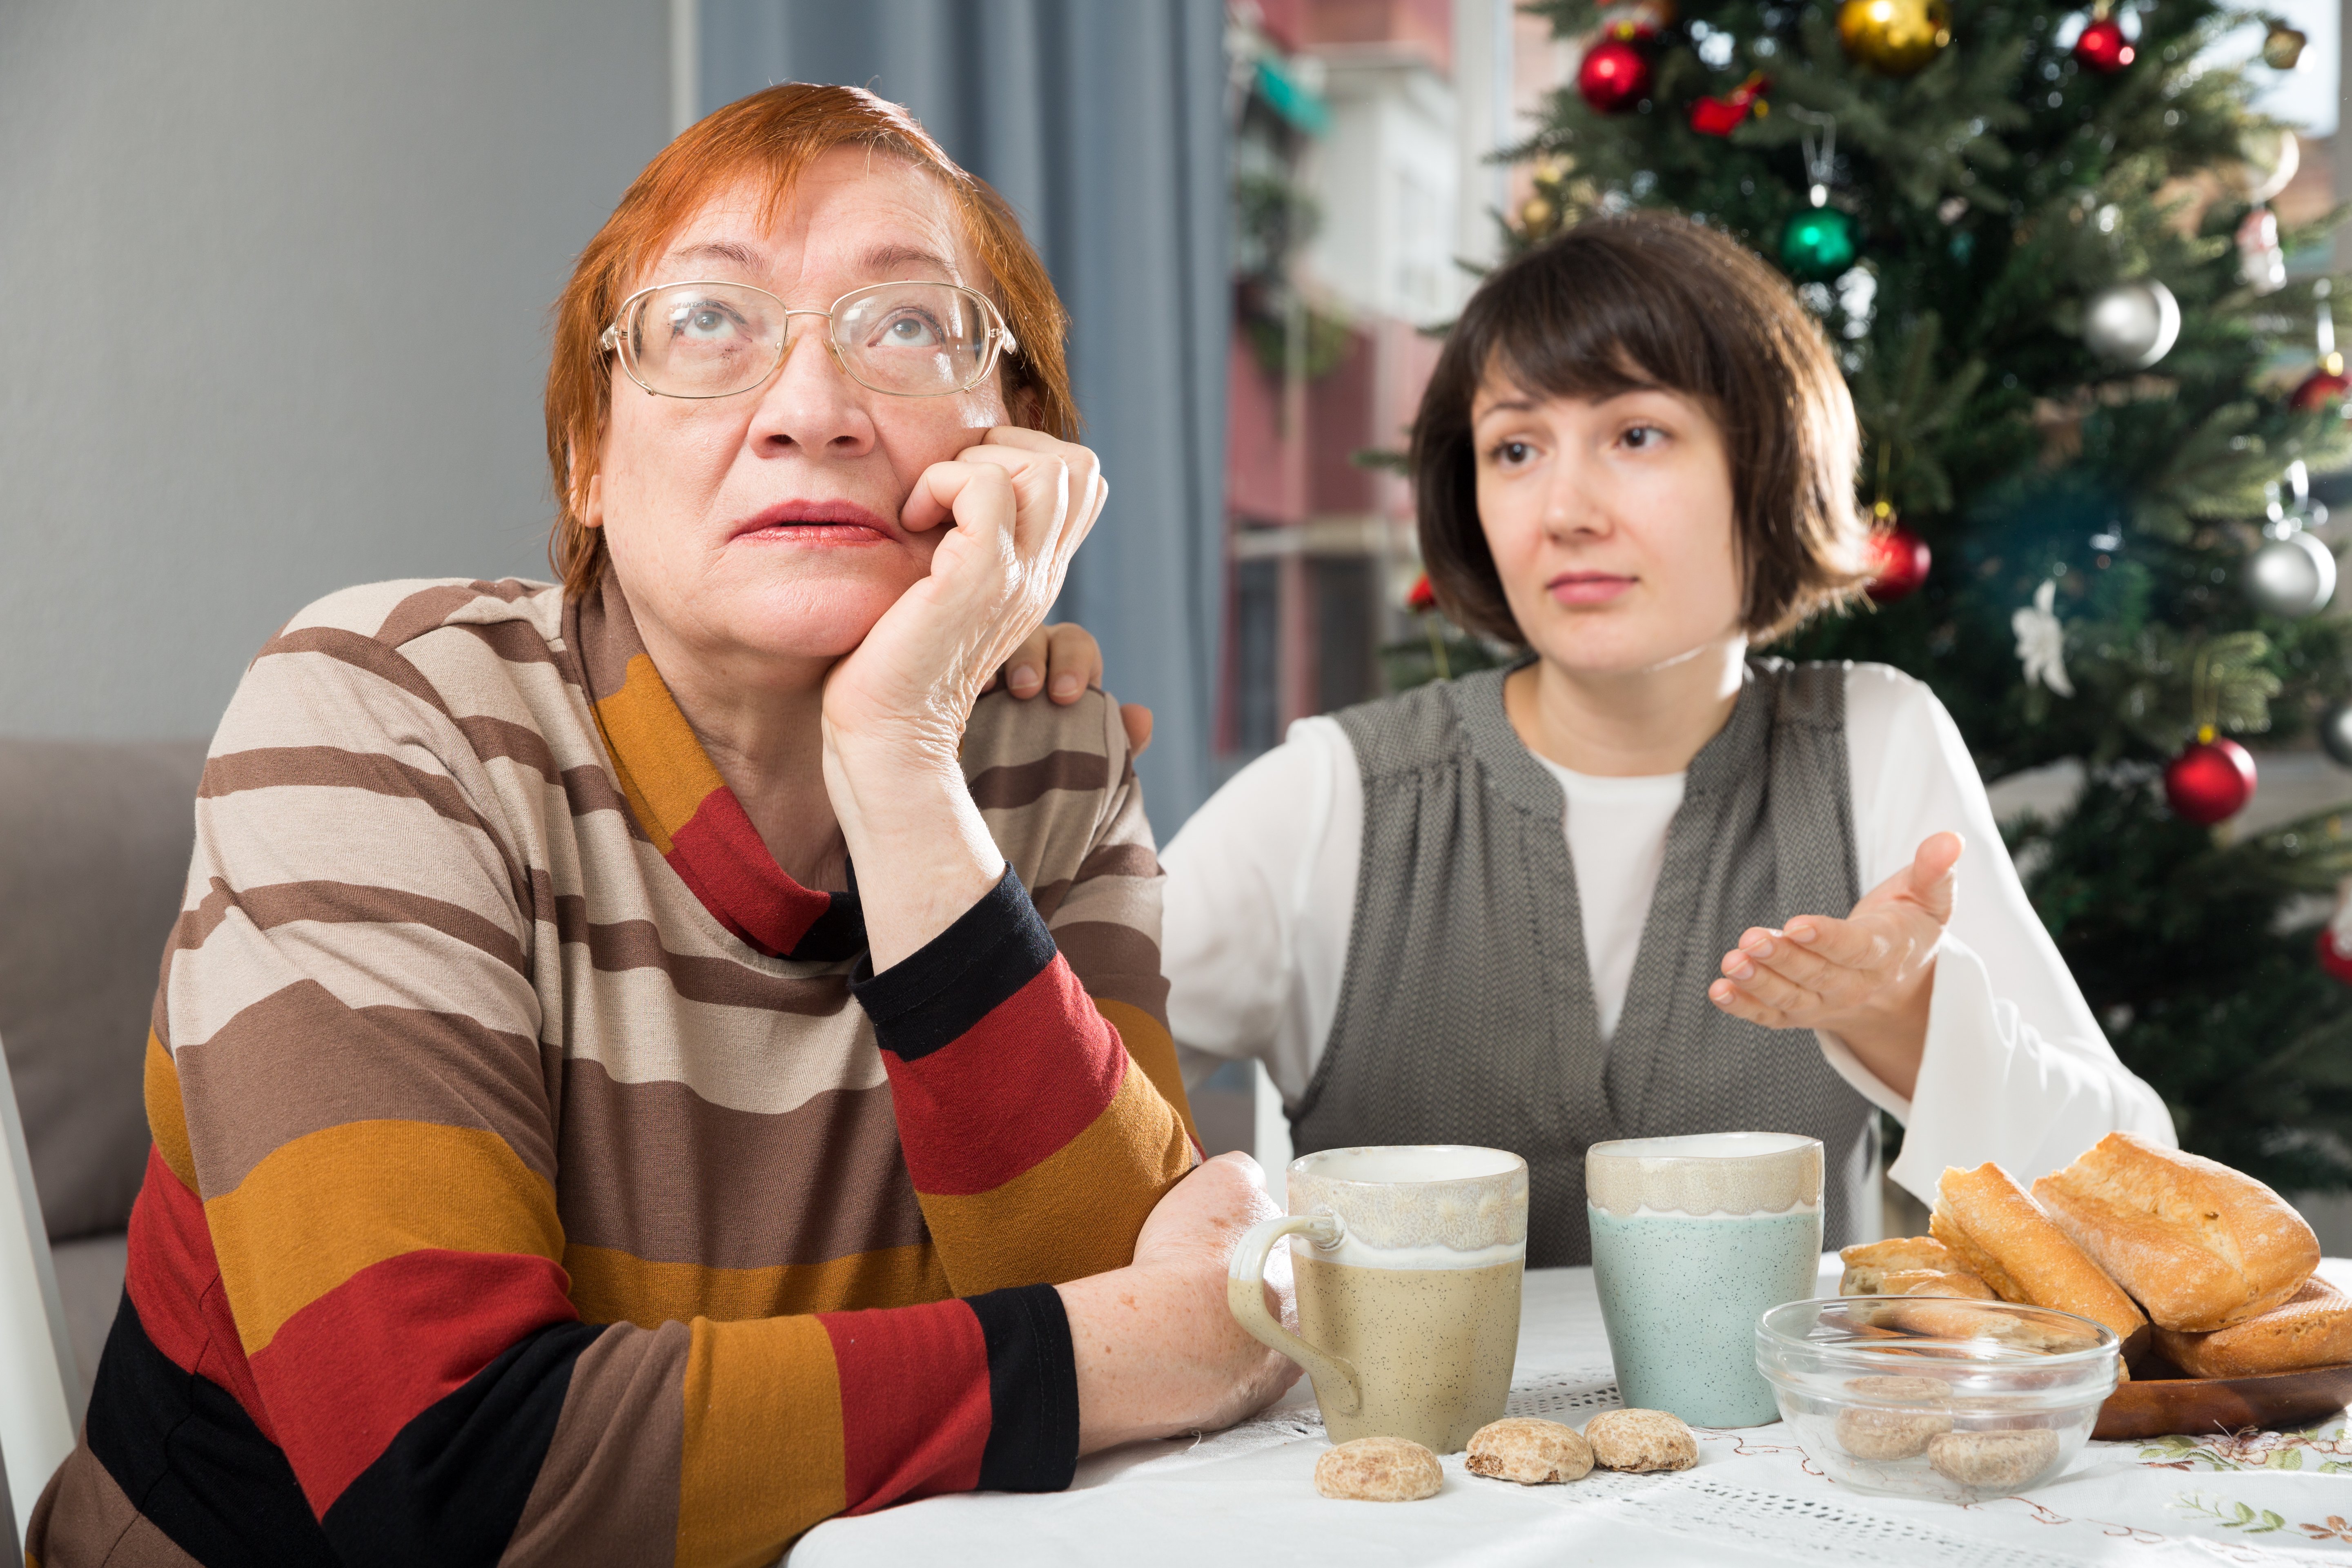 5 Tips for Navigating Relationships Around the Holidays